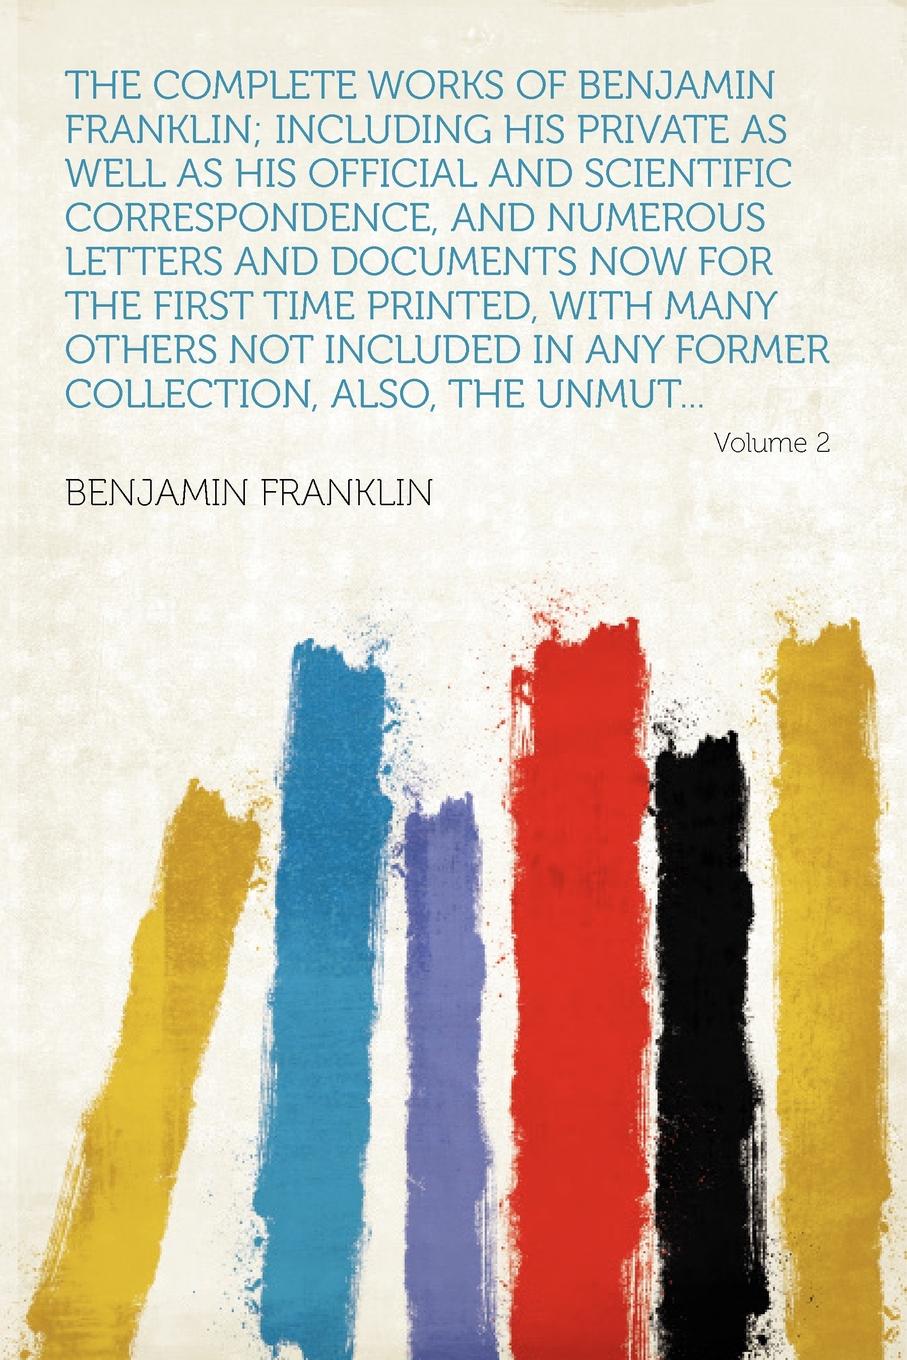 The Complete Works of Benjamin Franklin; Including His Private as Well as His Official and Scientific Correspondence, and Numerous Letters and Documents Now for the First Time Printed, With Many Others Not Included in Any Former Collection, Also, ...